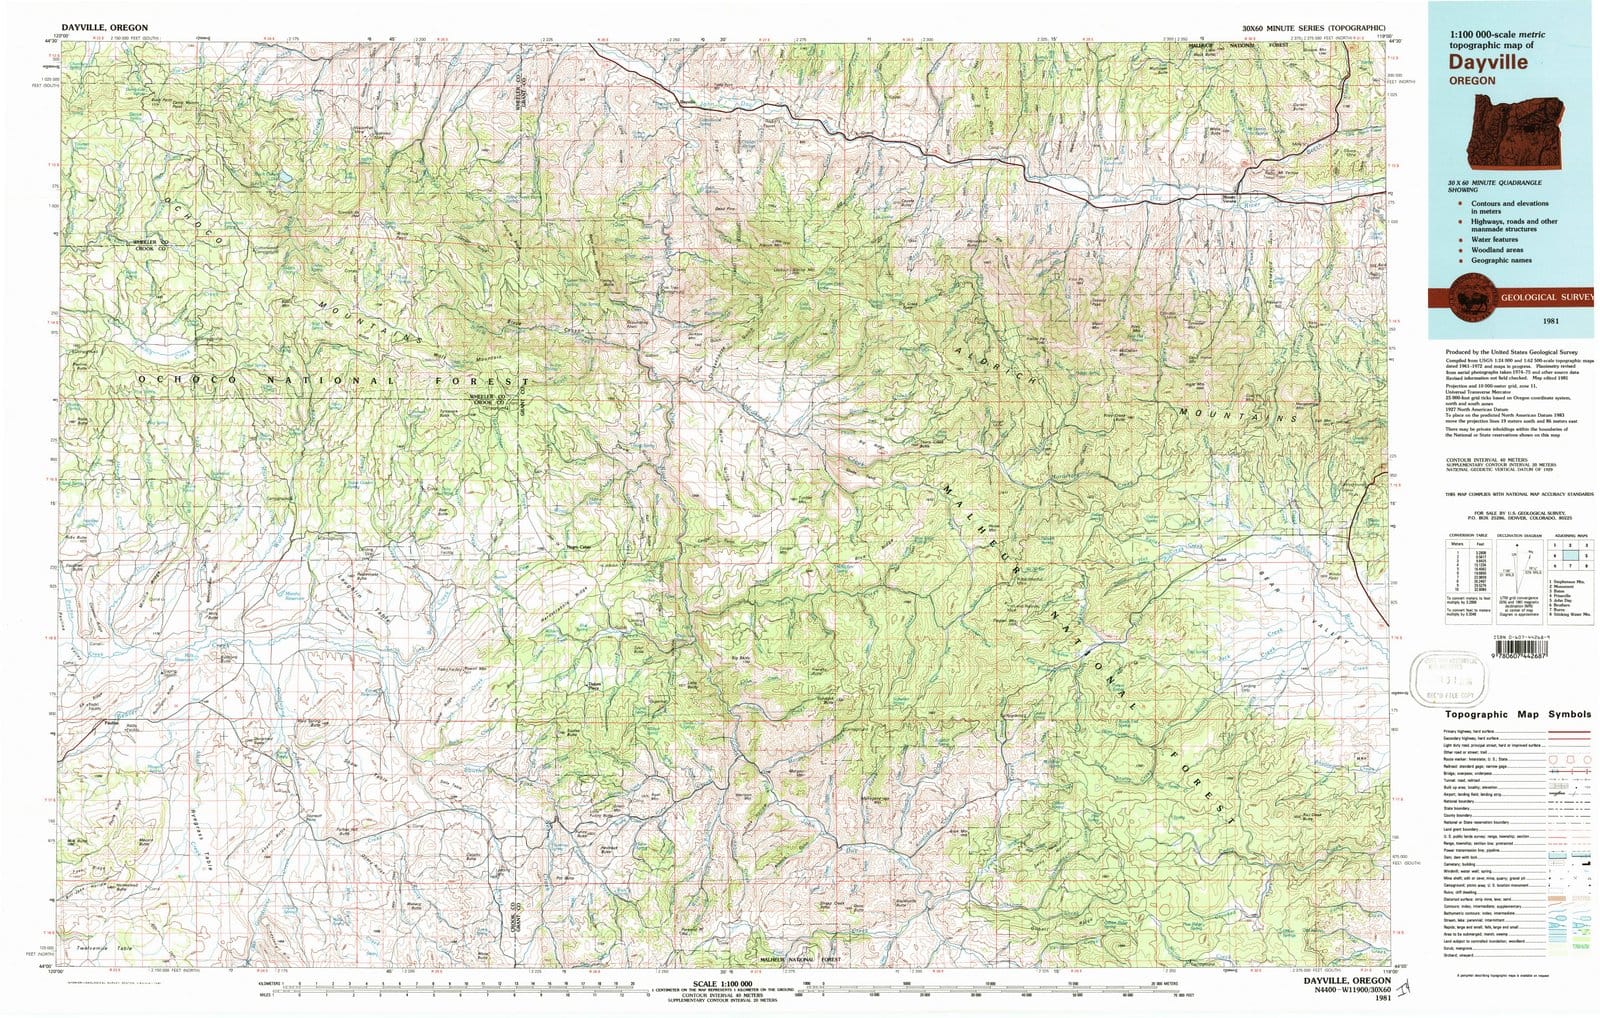 1981 Dayville, OR - Oregon - USGS Topographic Map